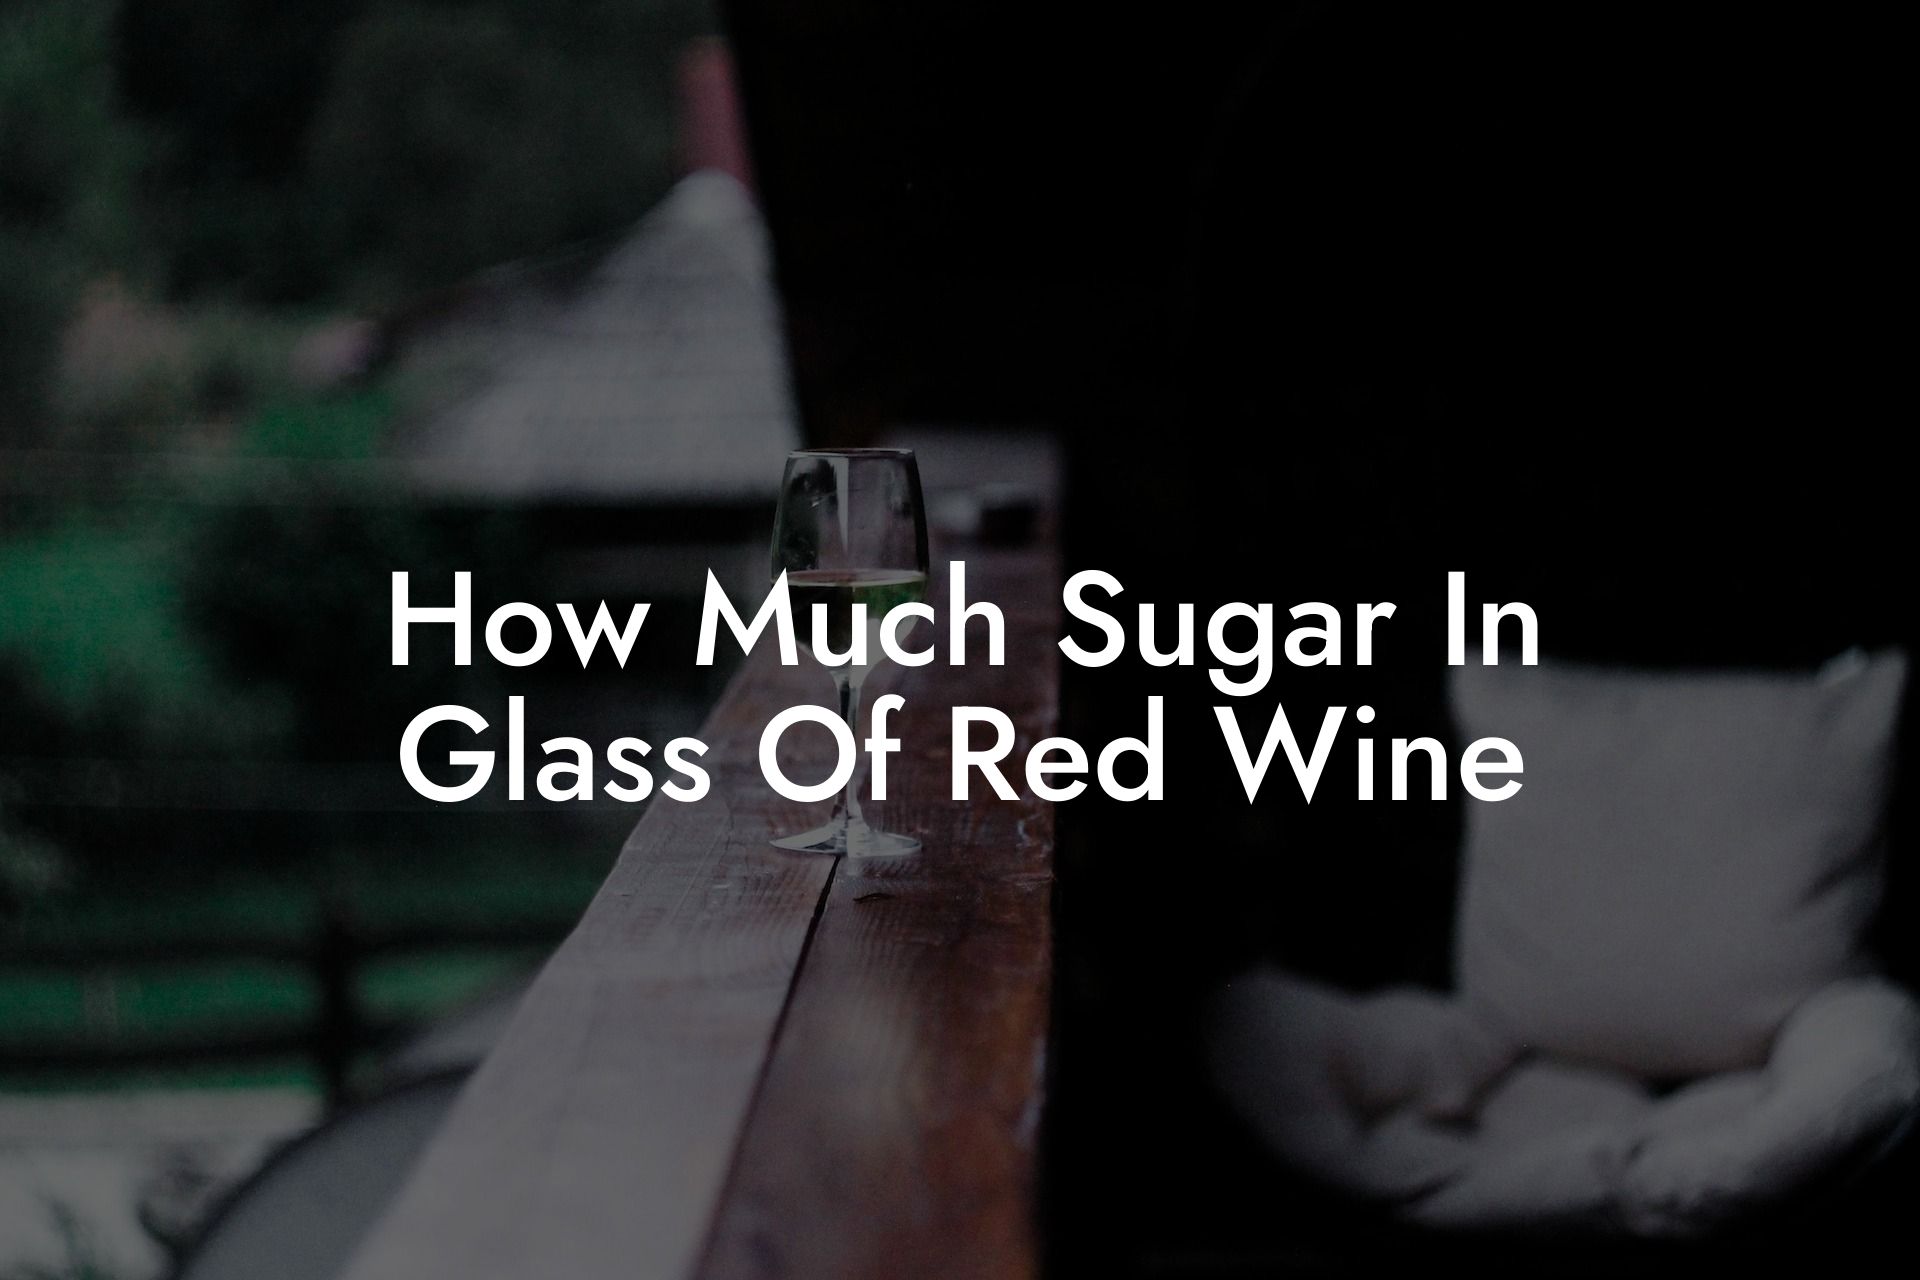 How Much Sugar In Glass Of Red Wine